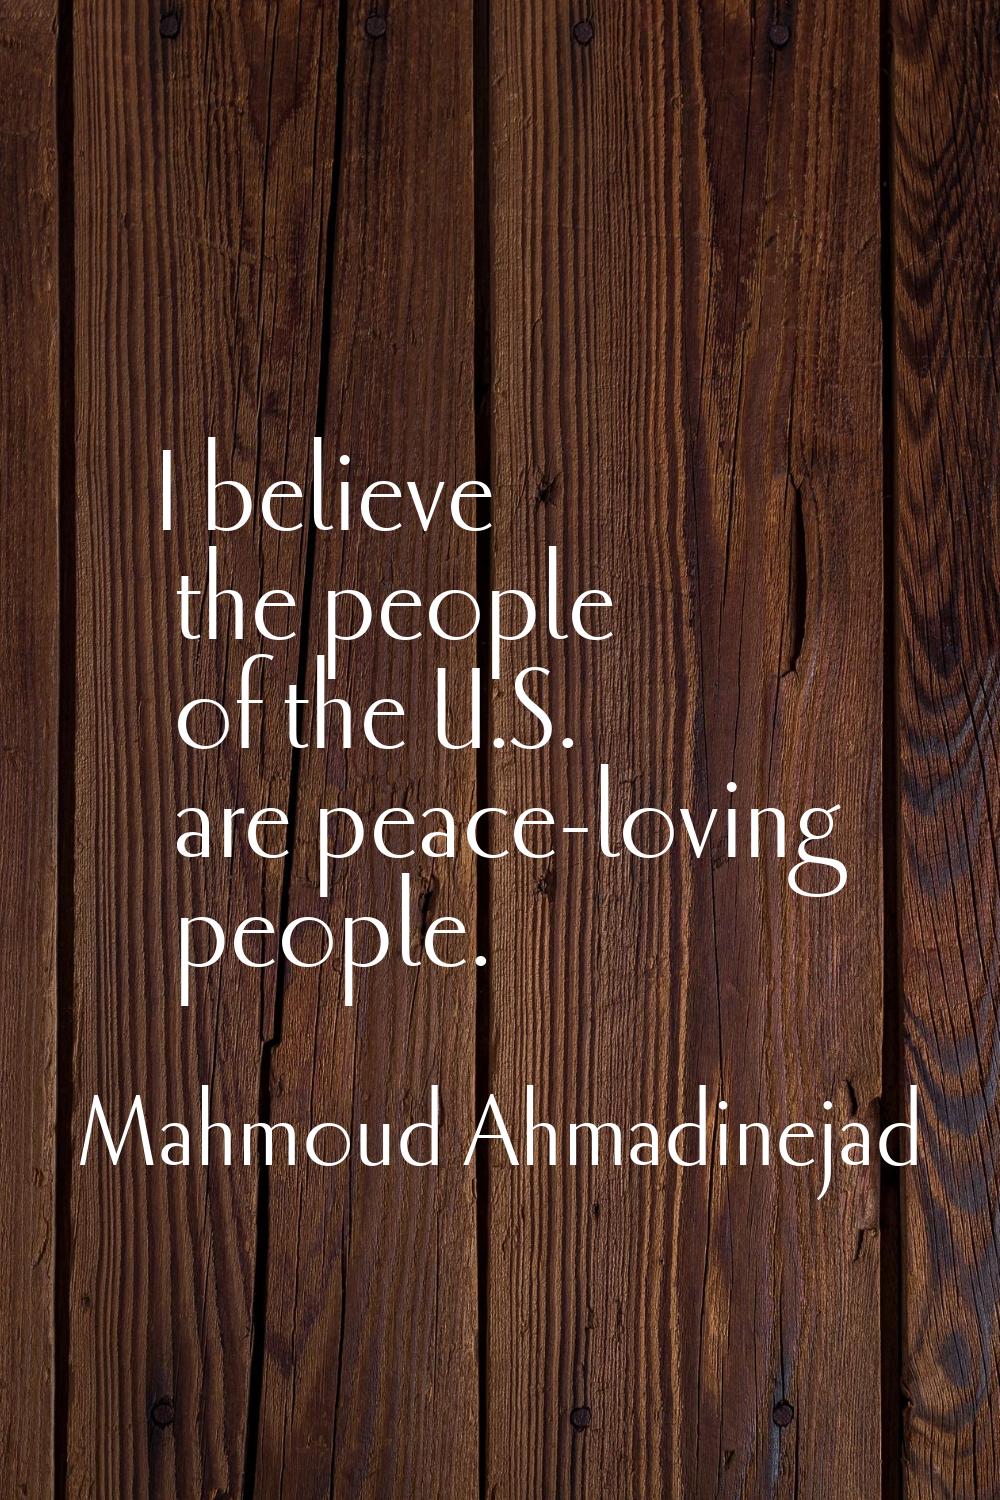 I believe the people of the U.S. are peace-loving people.